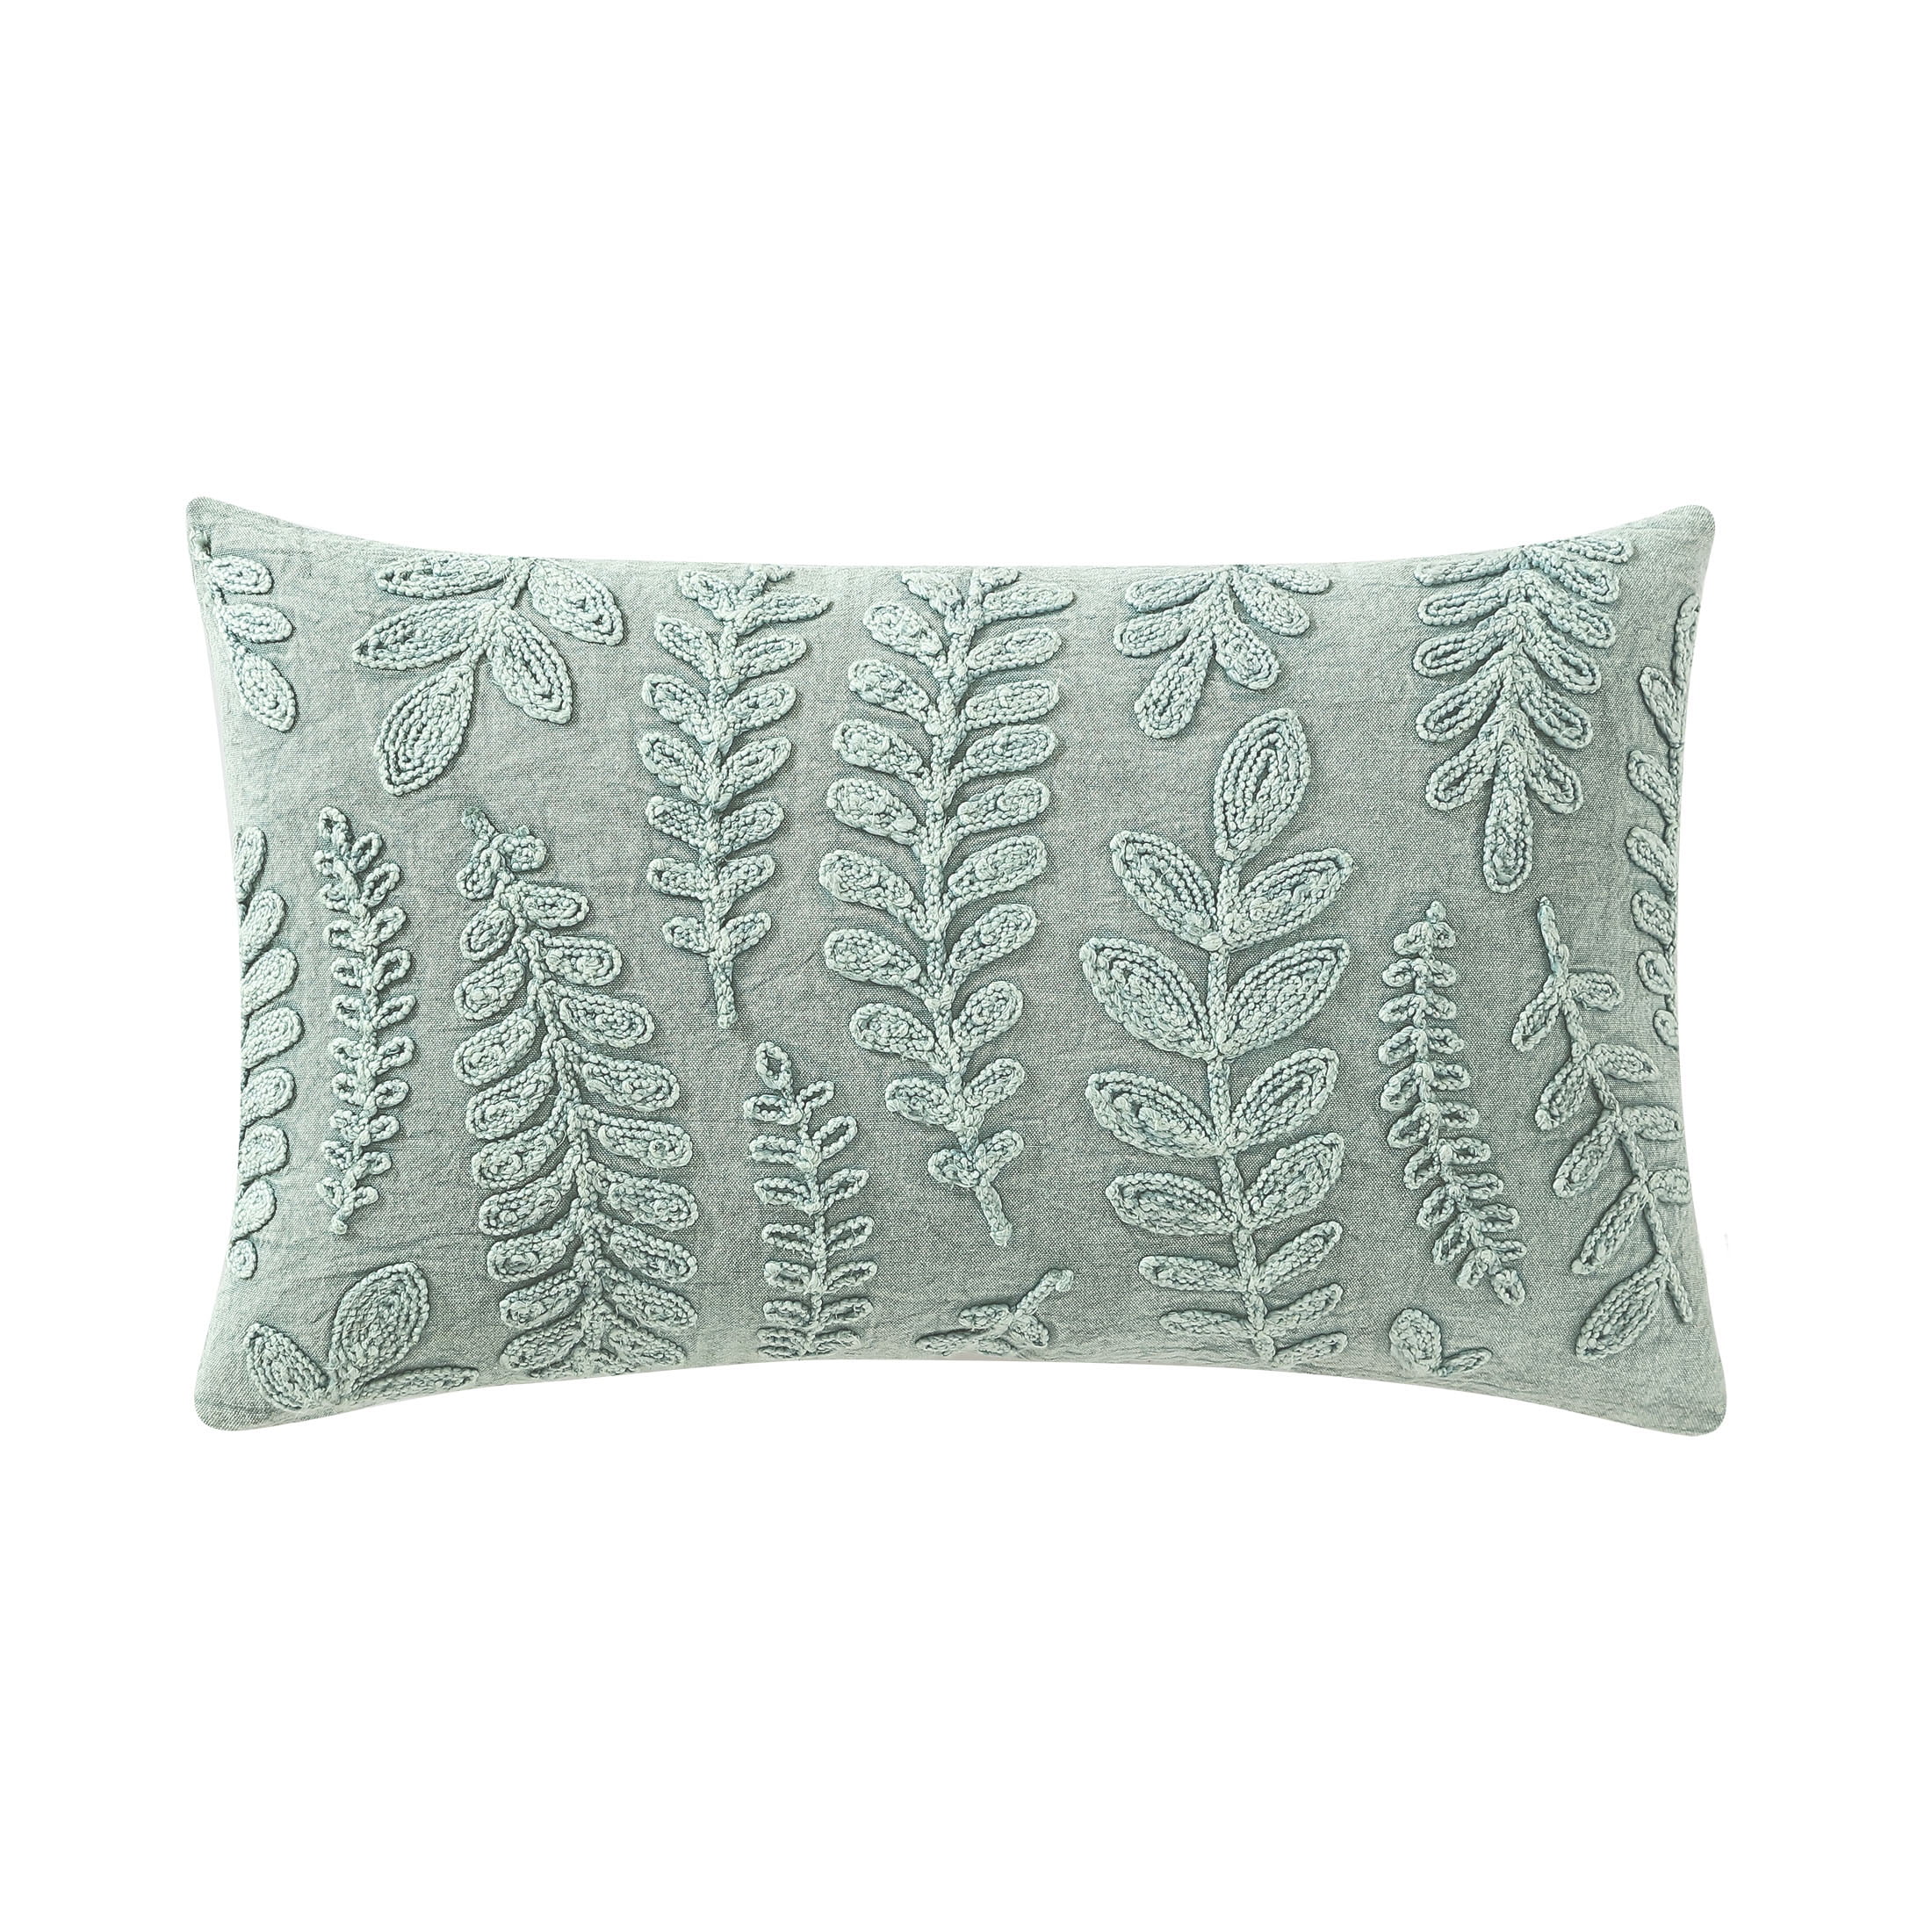 Thibaut Cairo Floral Green Throw Pillow | Chloe and Olive - Chloe & Olive